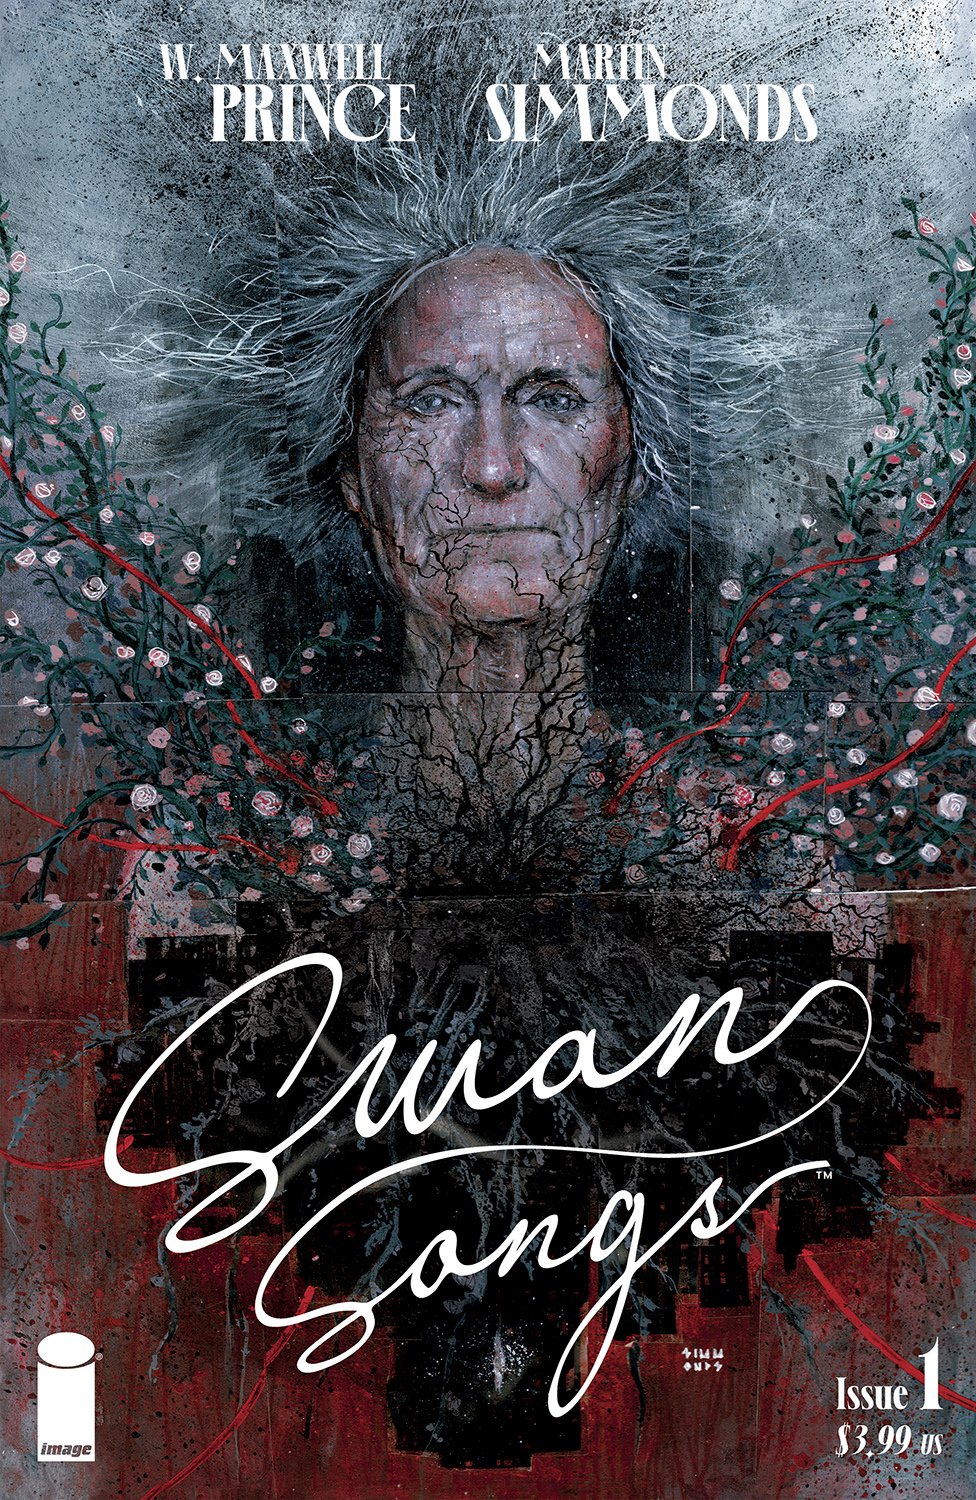 Swan Songs #1 Cover A Simmonds (Mature)